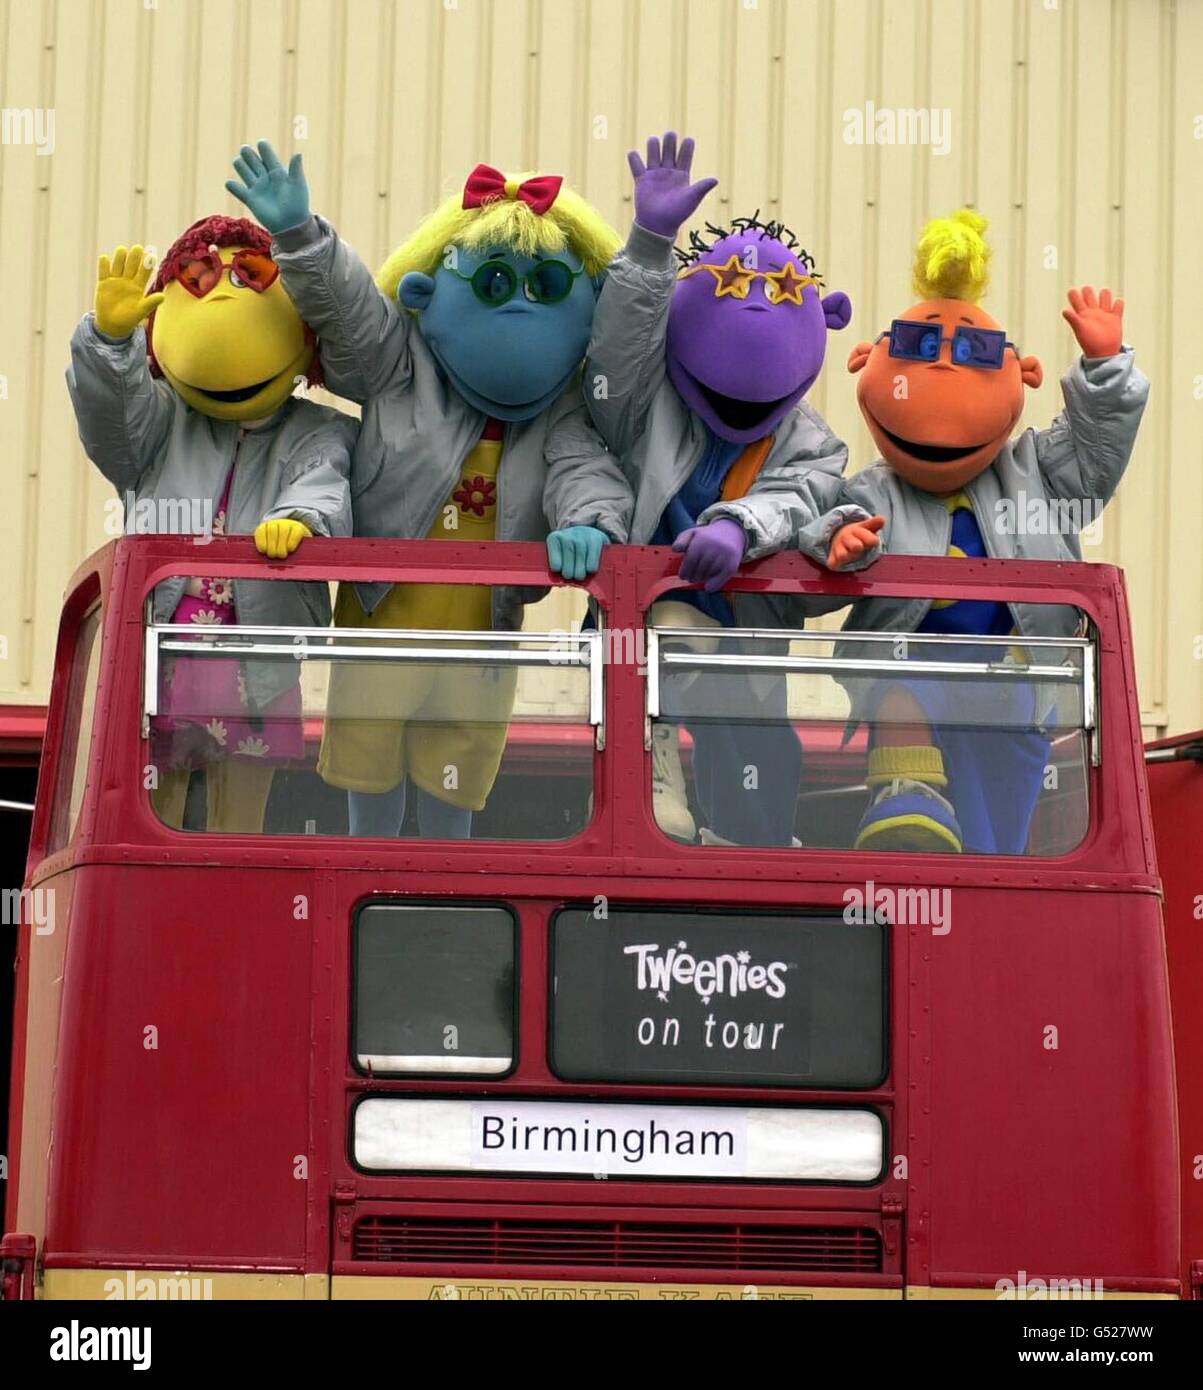 Children's TV favourites the Tweenies (L-R) Bella, Fizz, Milo and Jake, on a bus in London, to launch their Tweenies Live tour starting at the National Indoor Arena in Birmingham on 26/12/2000. Stock Photo